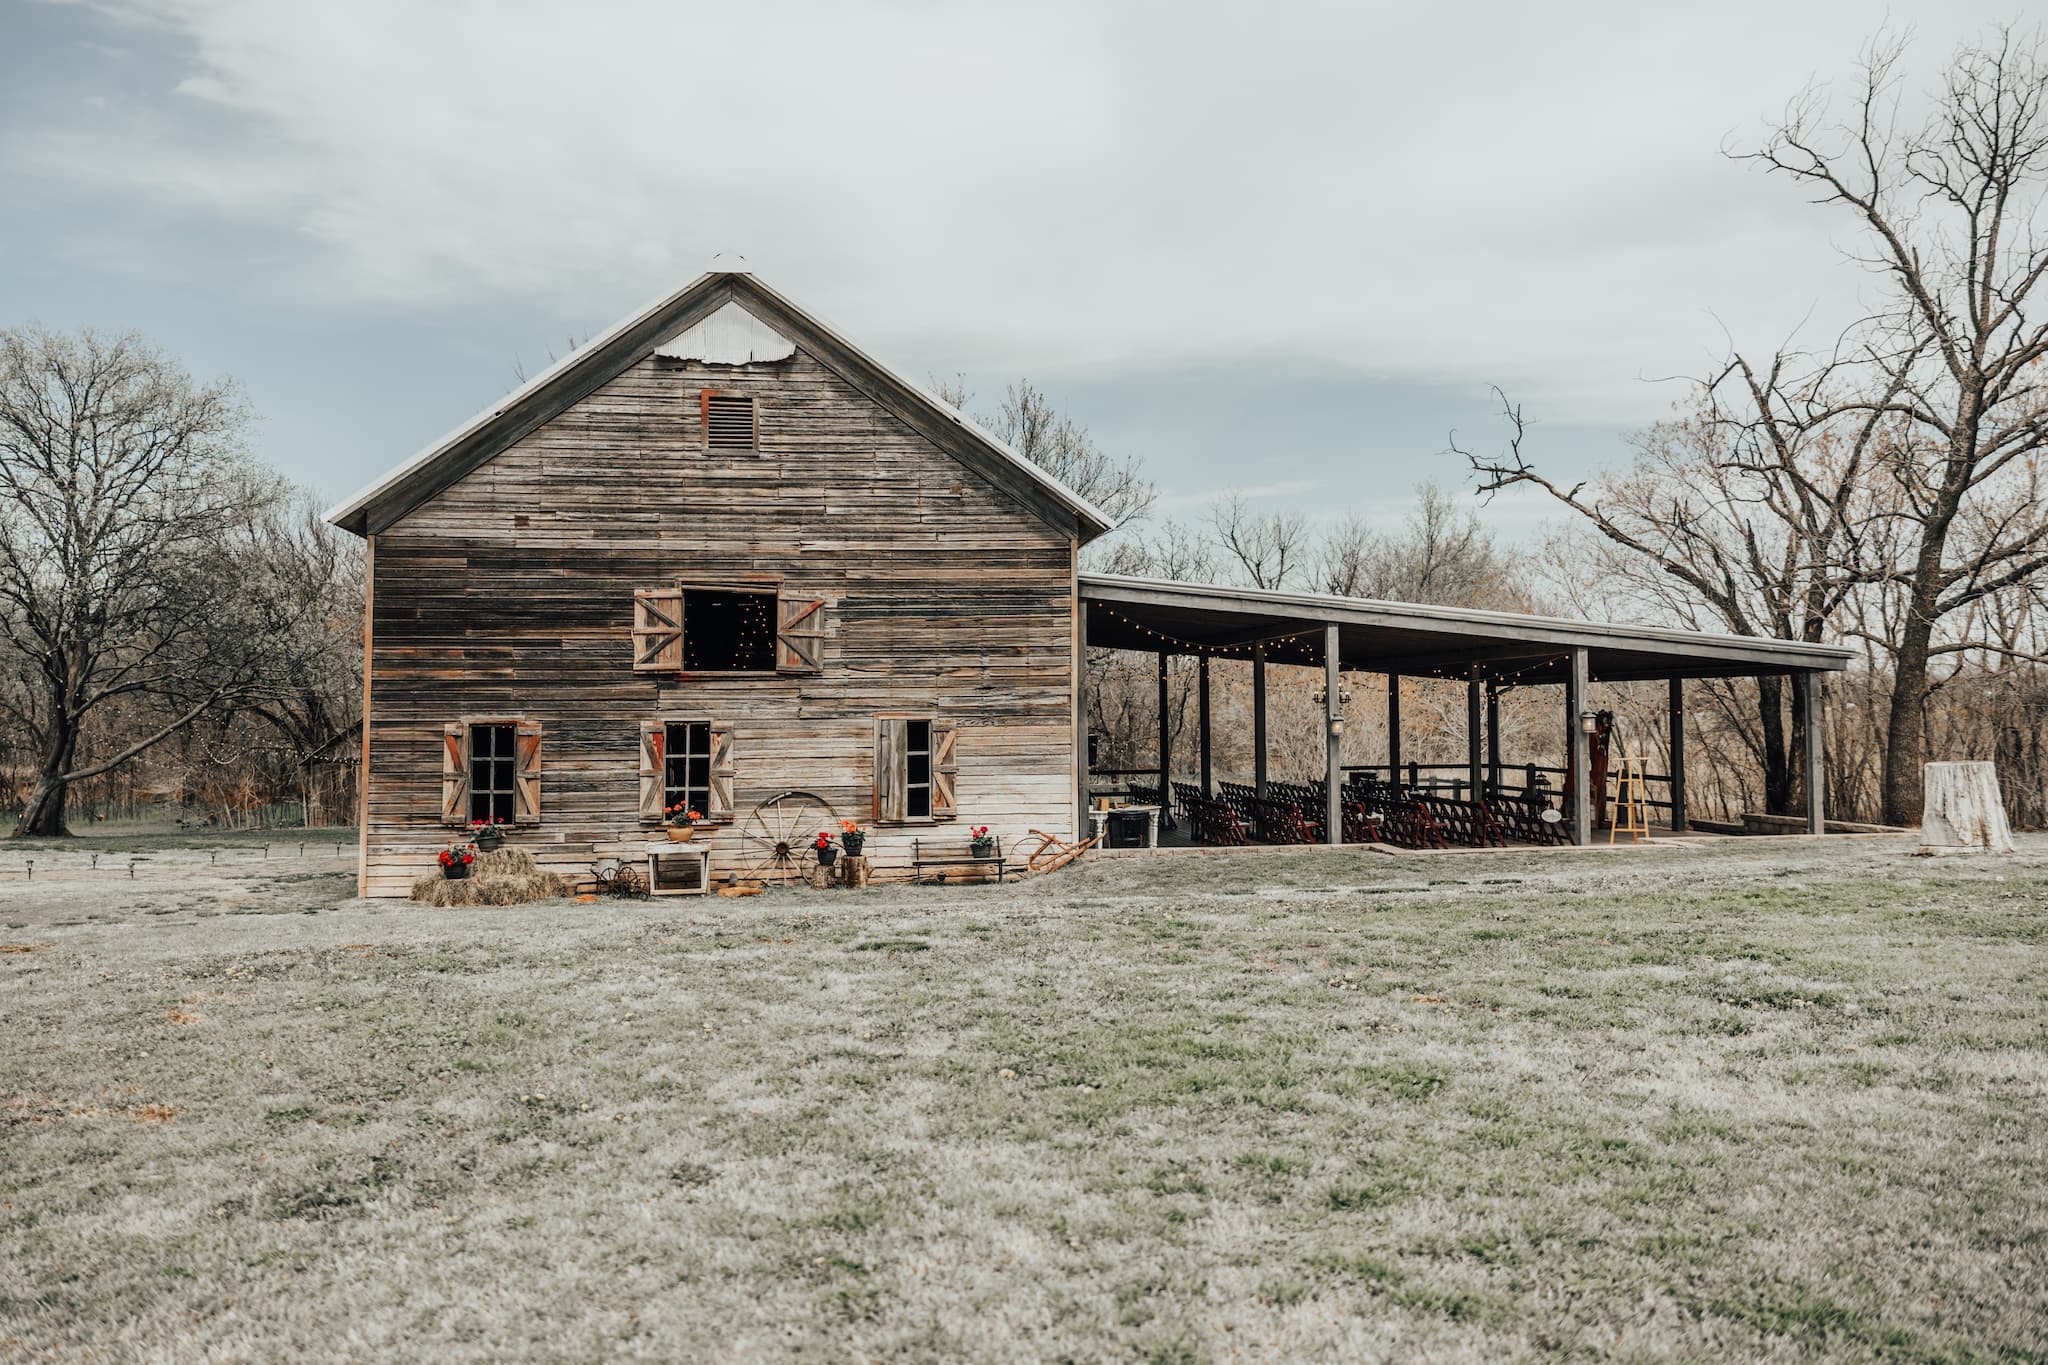 A Review of The Barn at the Woods: A Beautiful Countryside Wedding Venue in Edmond, OK